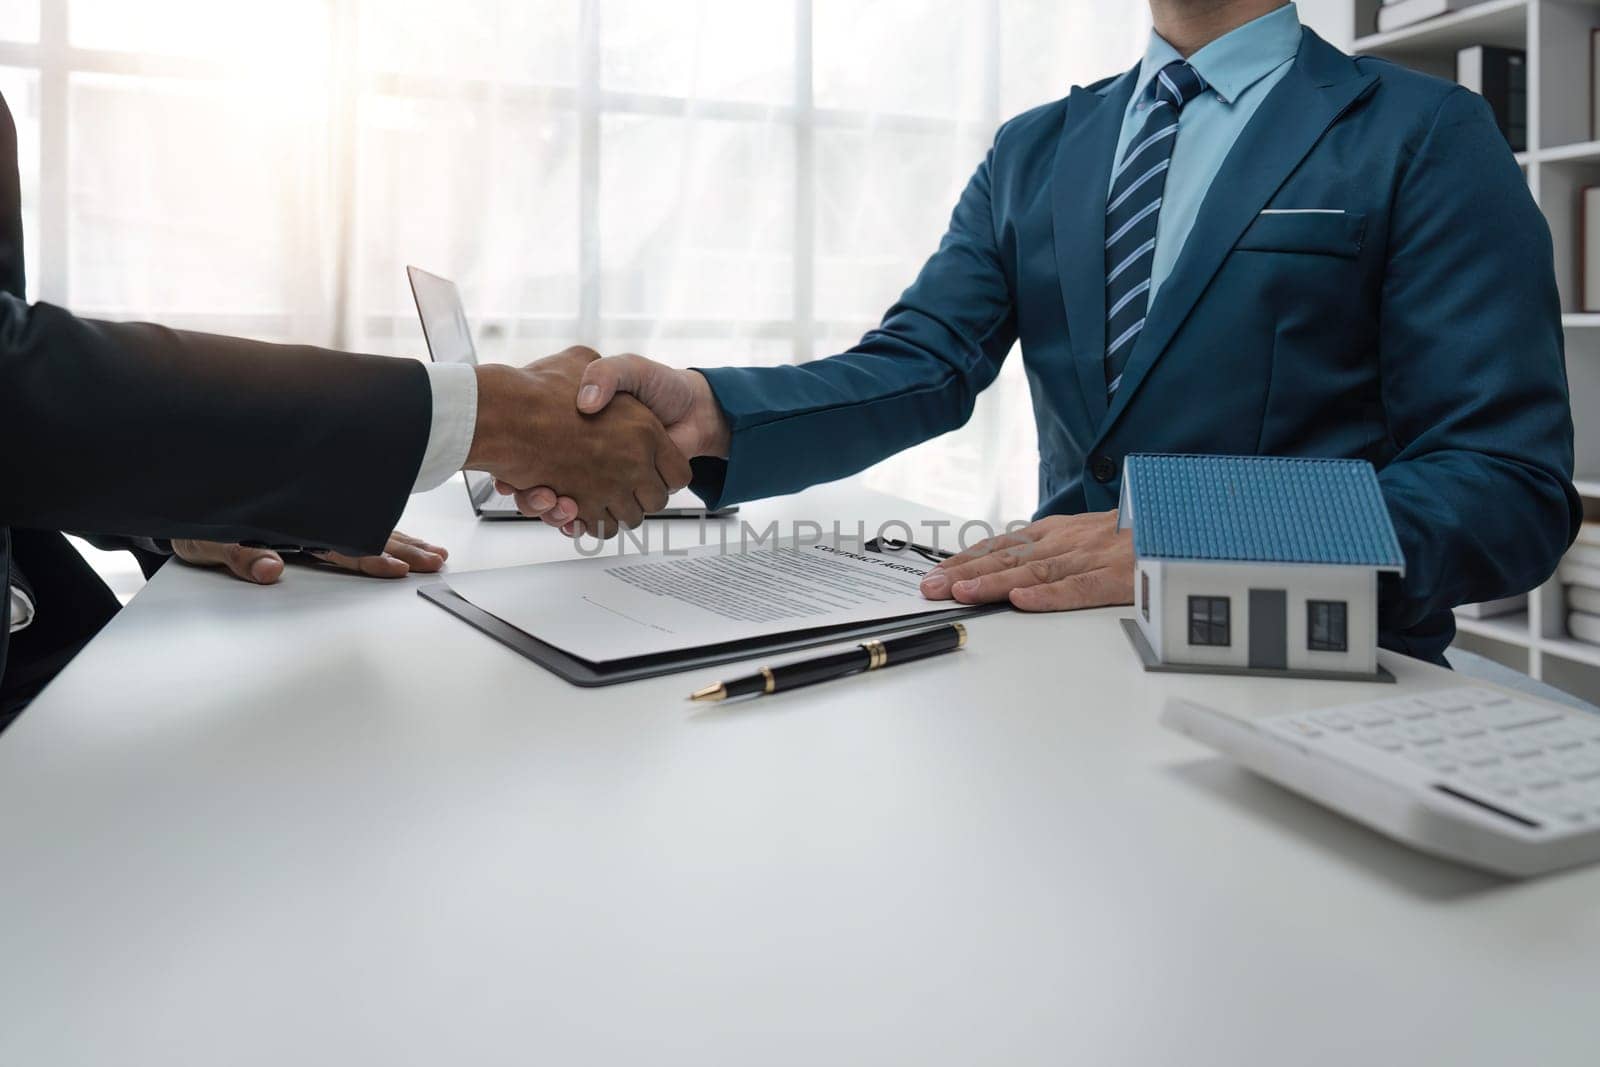 real estate agent shaking hand his client after signing contract,concept for real estate, moving home or renting property.